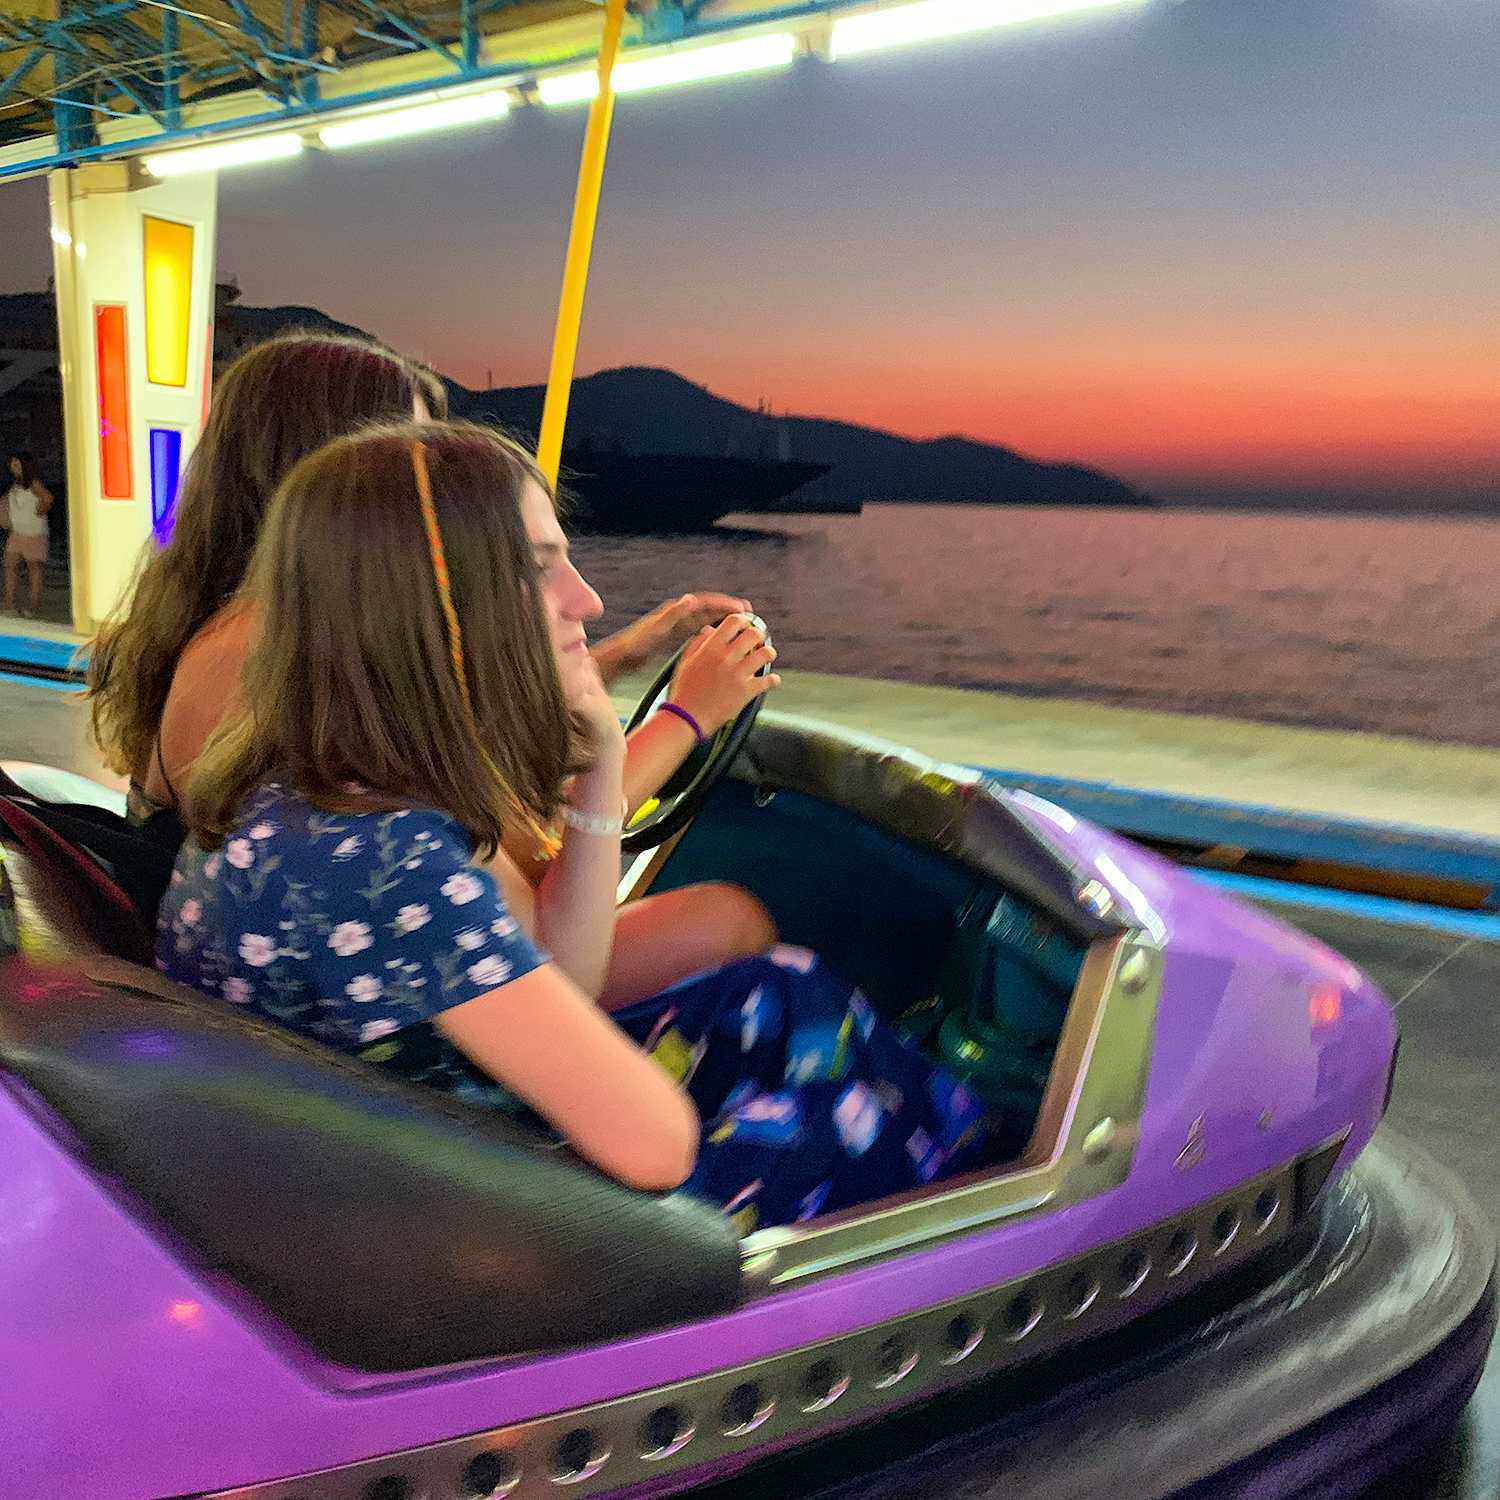 Photo Caption: Have fun after sunset with your kids at the Luna Park